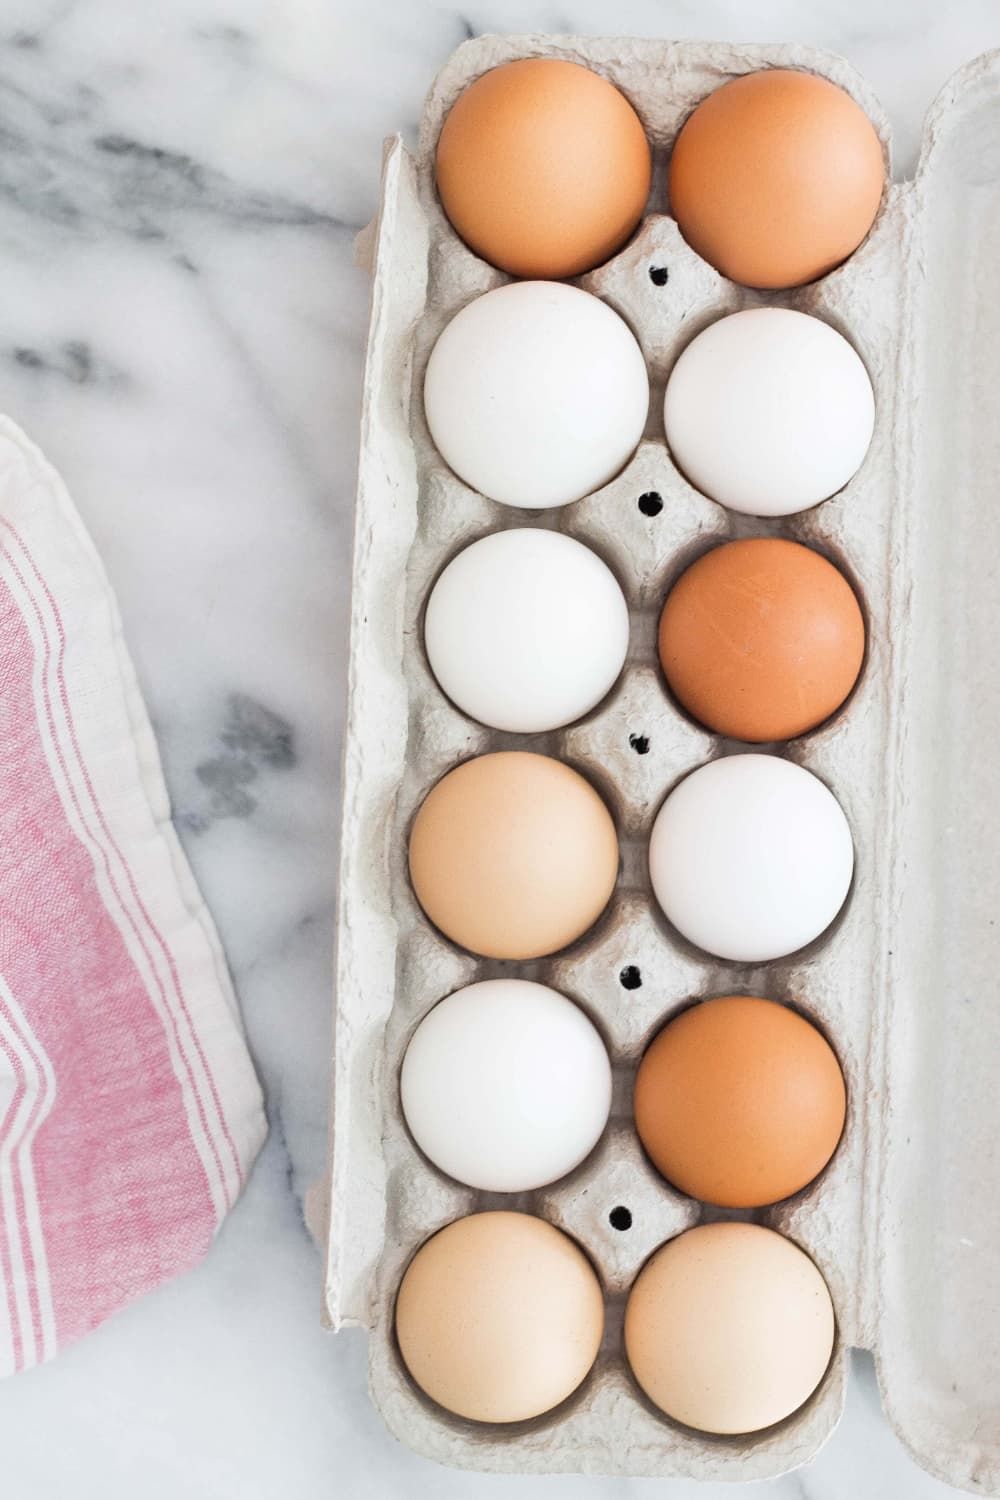 Different types of eggs in a carton including white, brown, and tan.